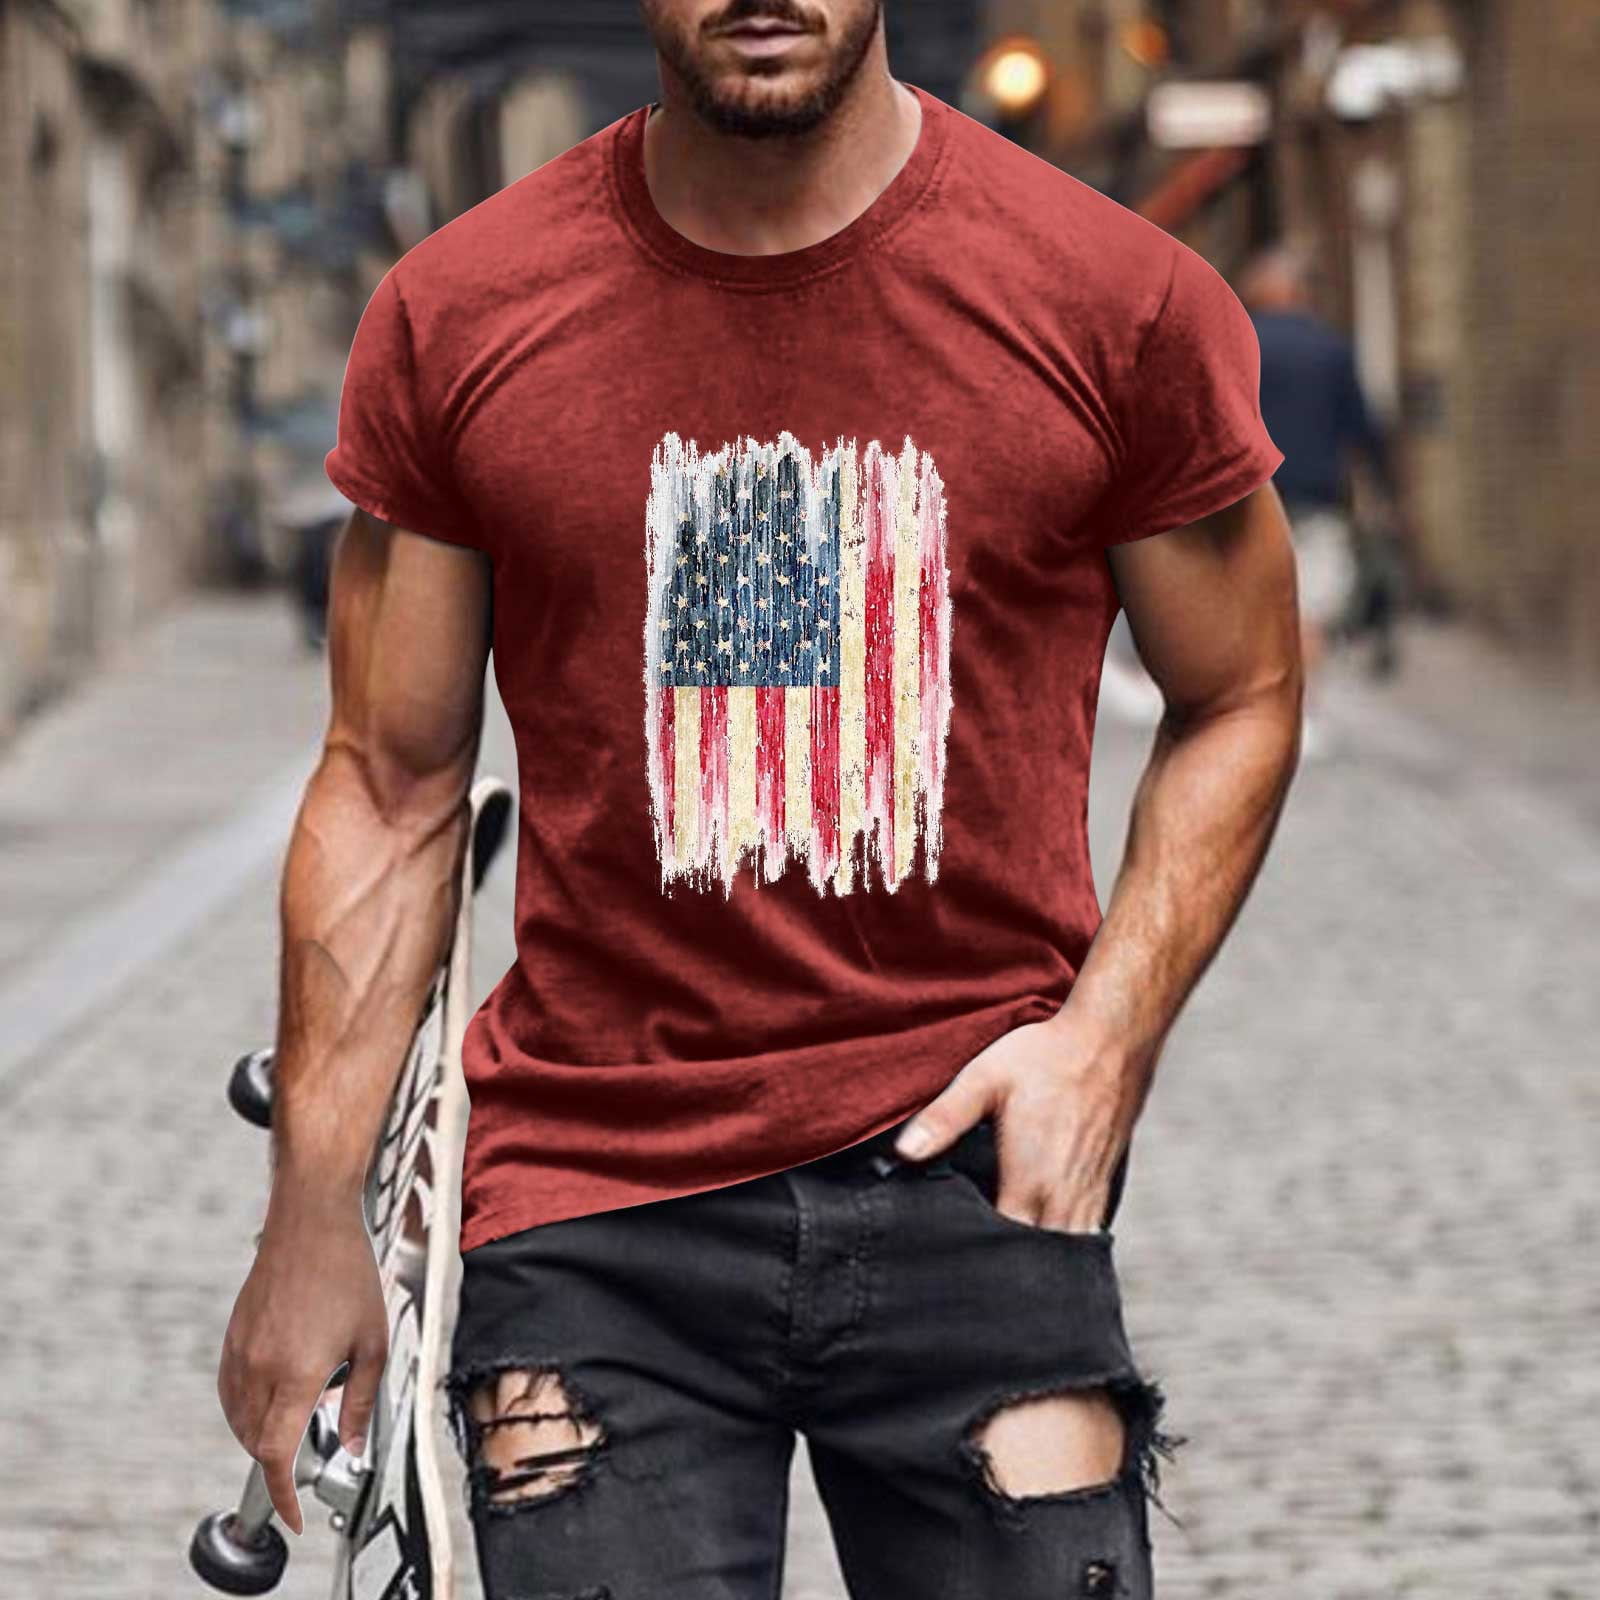 ZKCCNUK Comfort Colors Tshirt Men Casual Round Neck 3D Digital Printing  Pullover Fitness Sports Shorts Sleeves T Shirt Blouse July 4 Shirts for Men  on